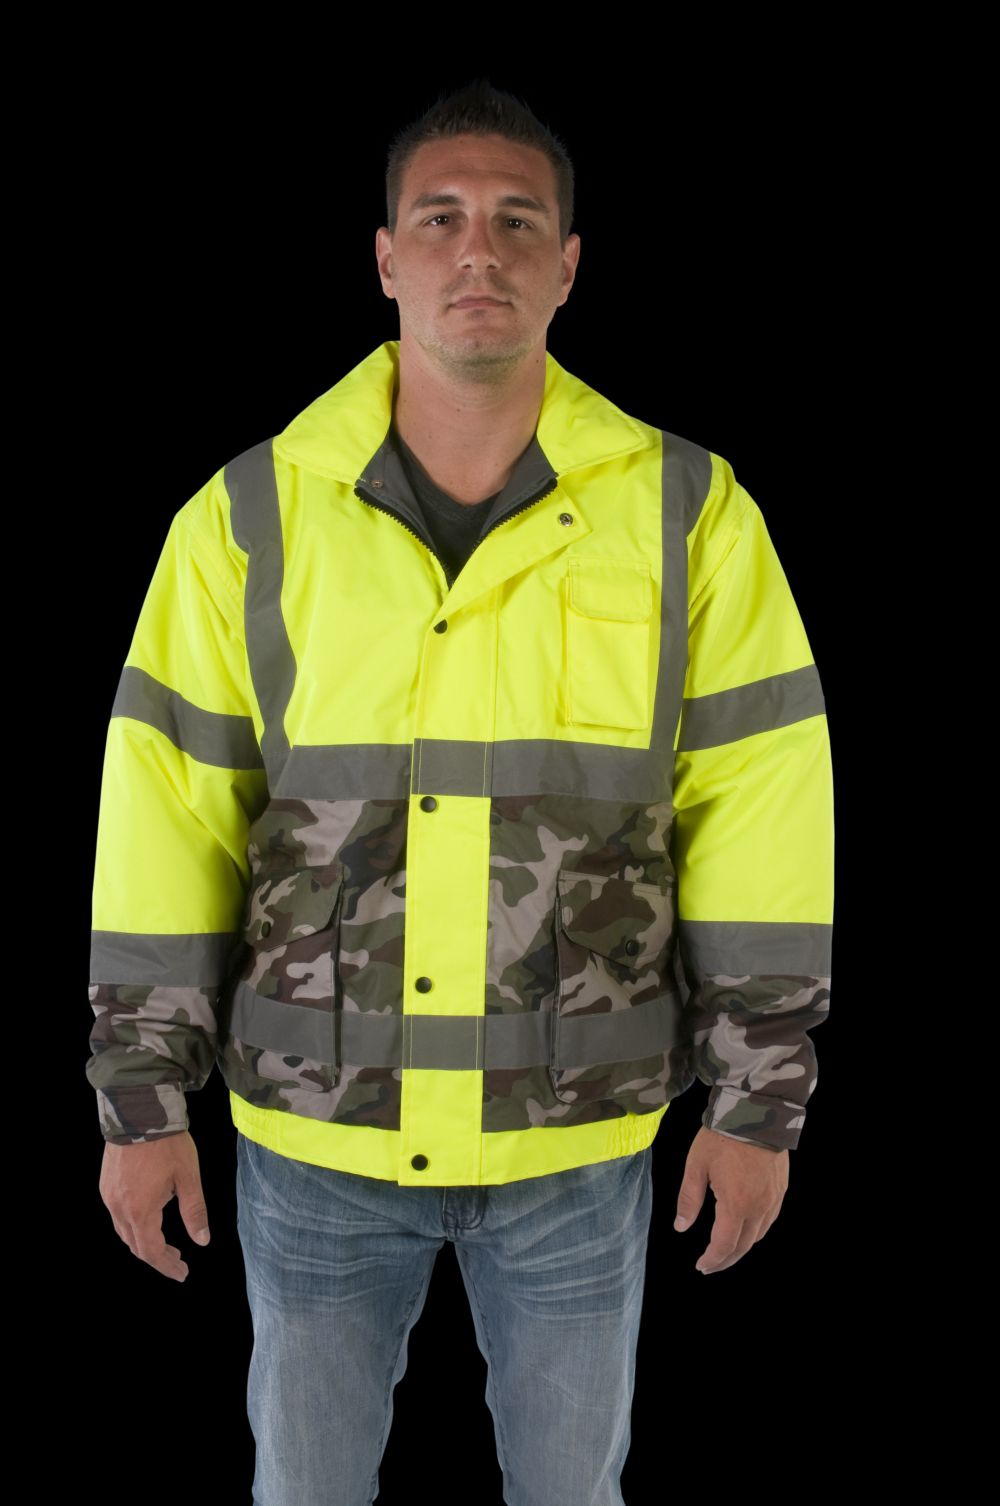 UHV561 HiVis Bomber with Camo Bottom - SPECIAL EDITION